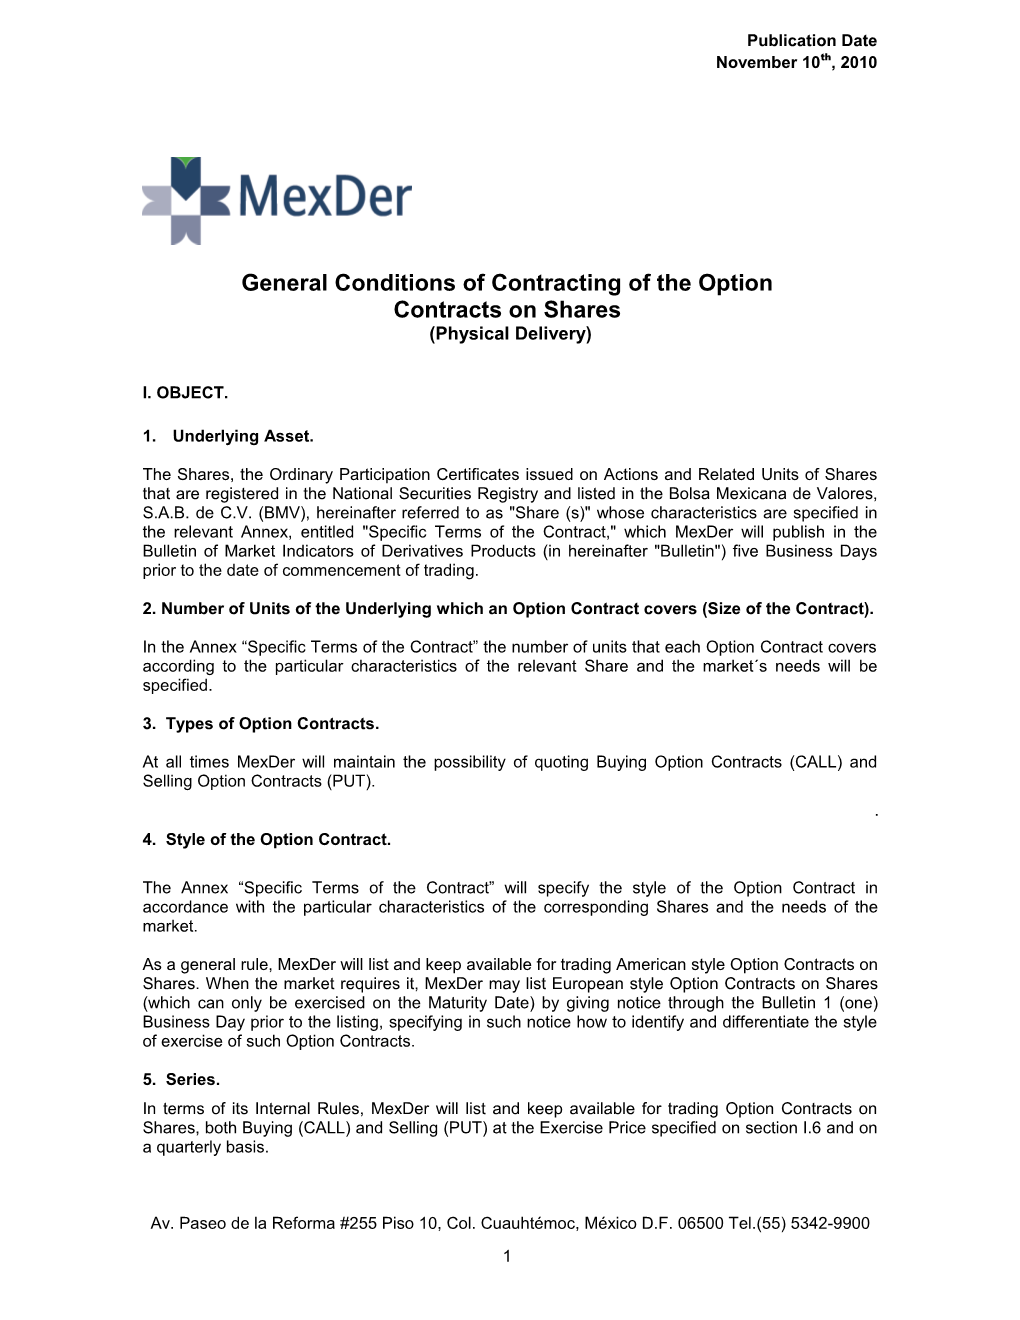 General Conditions of Contracting of the Option